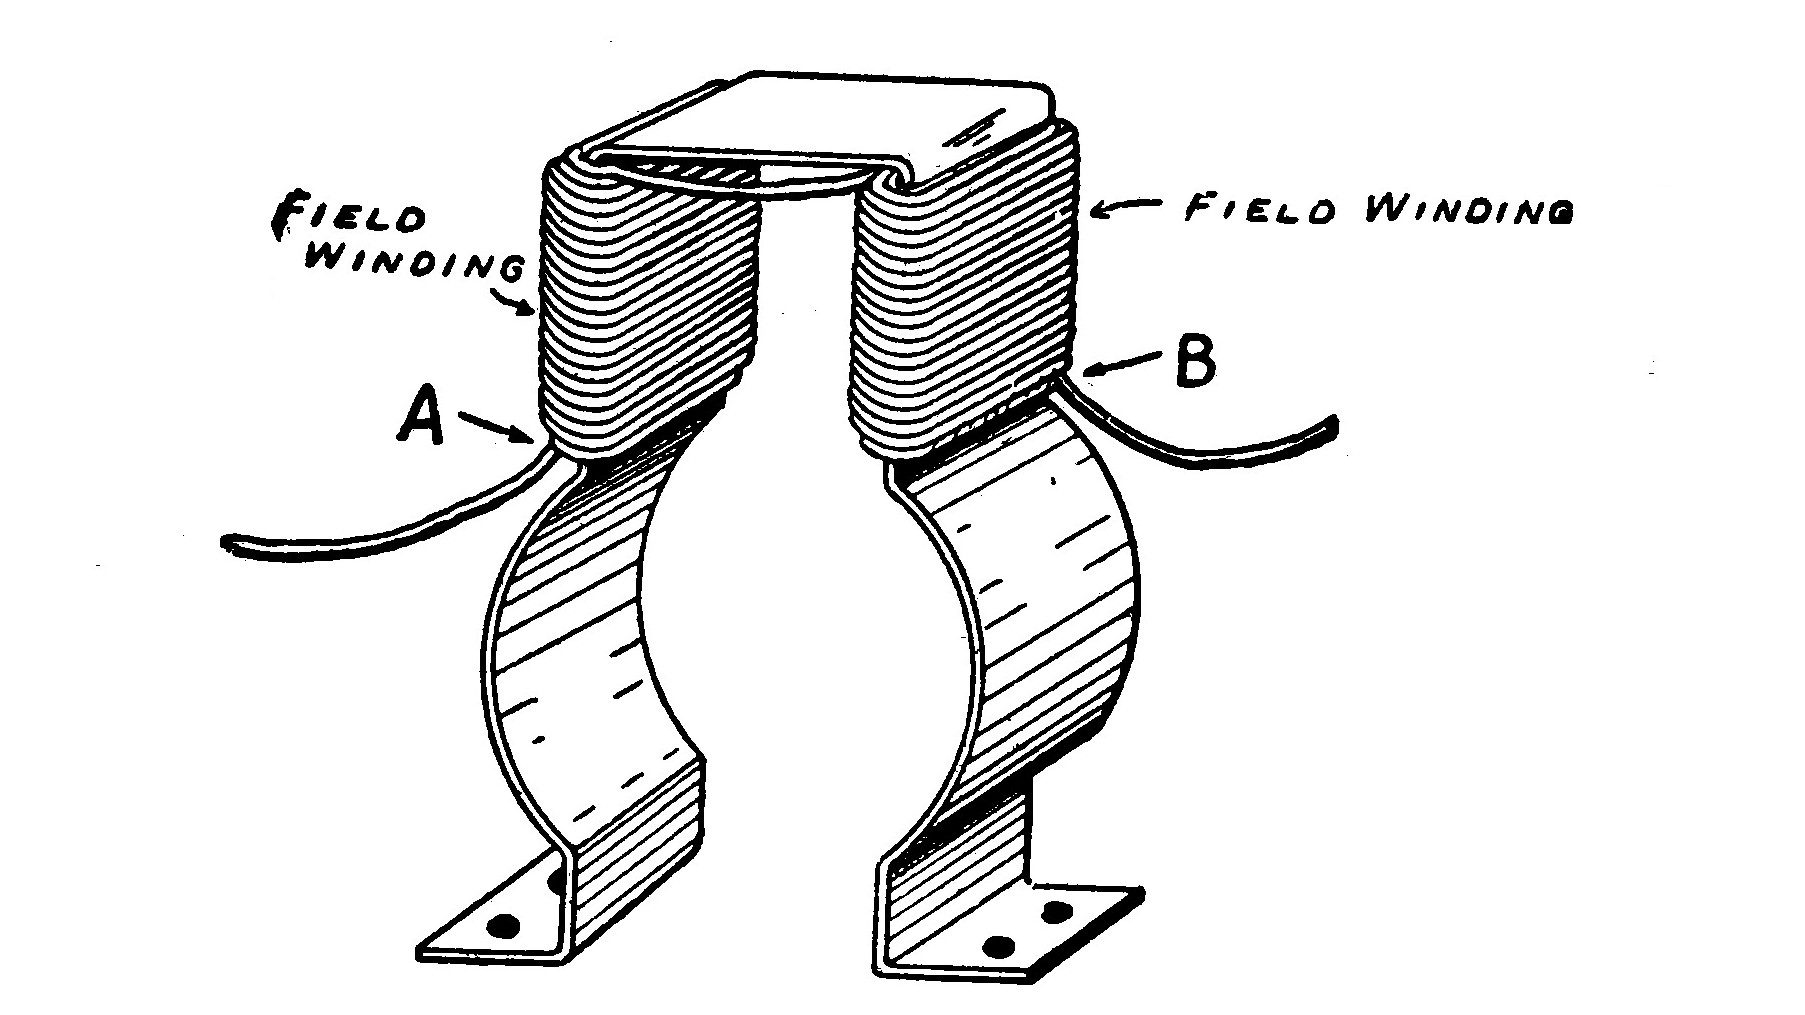 FIG. 15.—The Field Frame with the Winding in position.